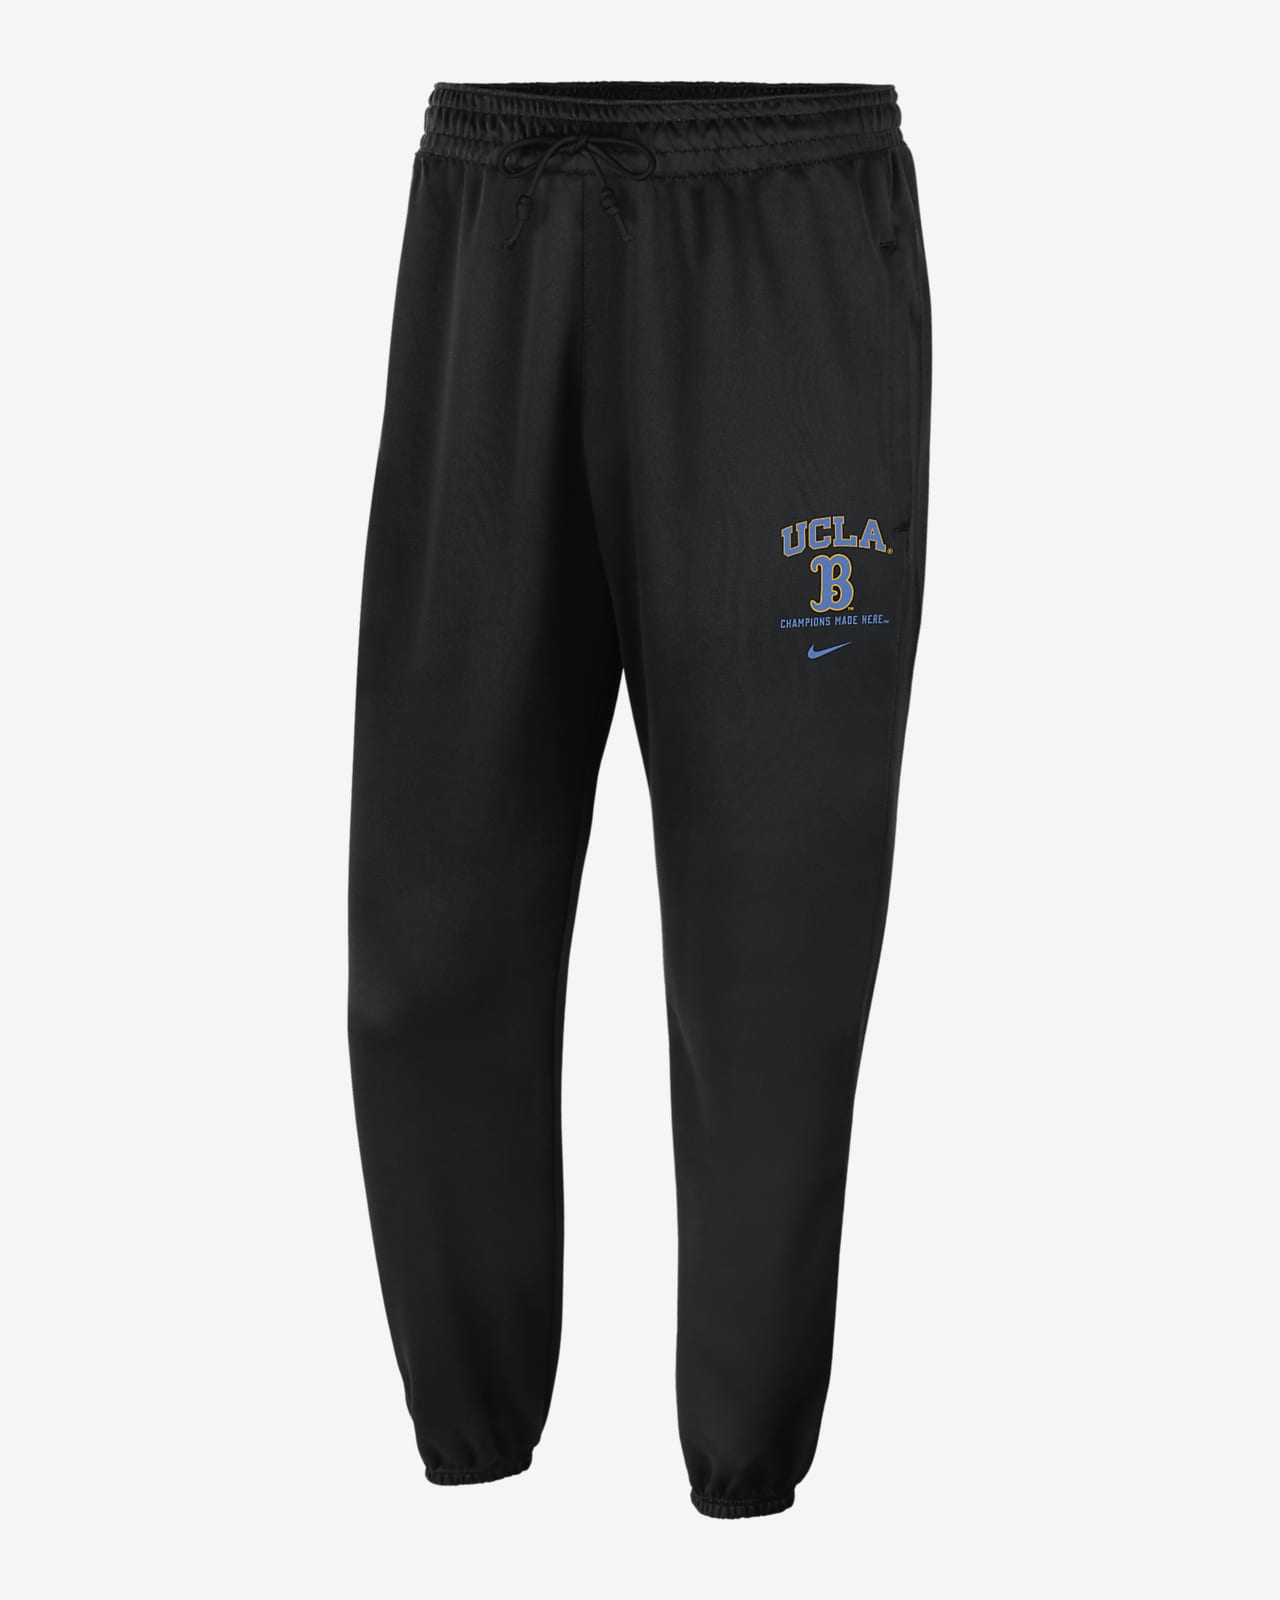 UCLA Standard Issue Men's Nike College Joggers